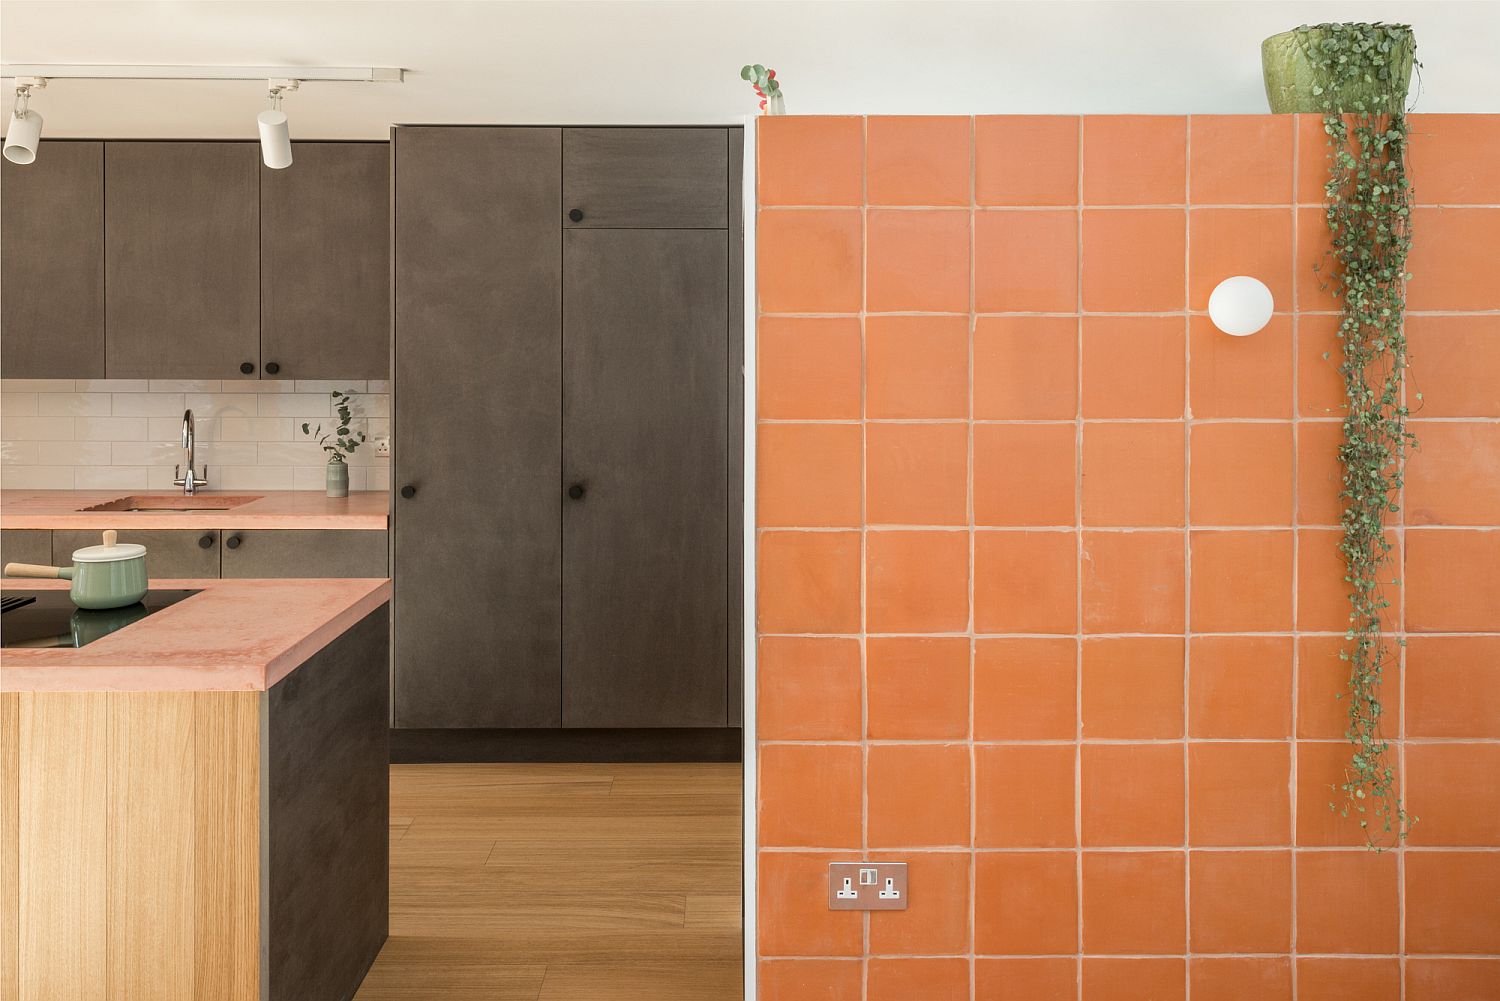 Pink, orange and natural light bring ample brightness to the interior